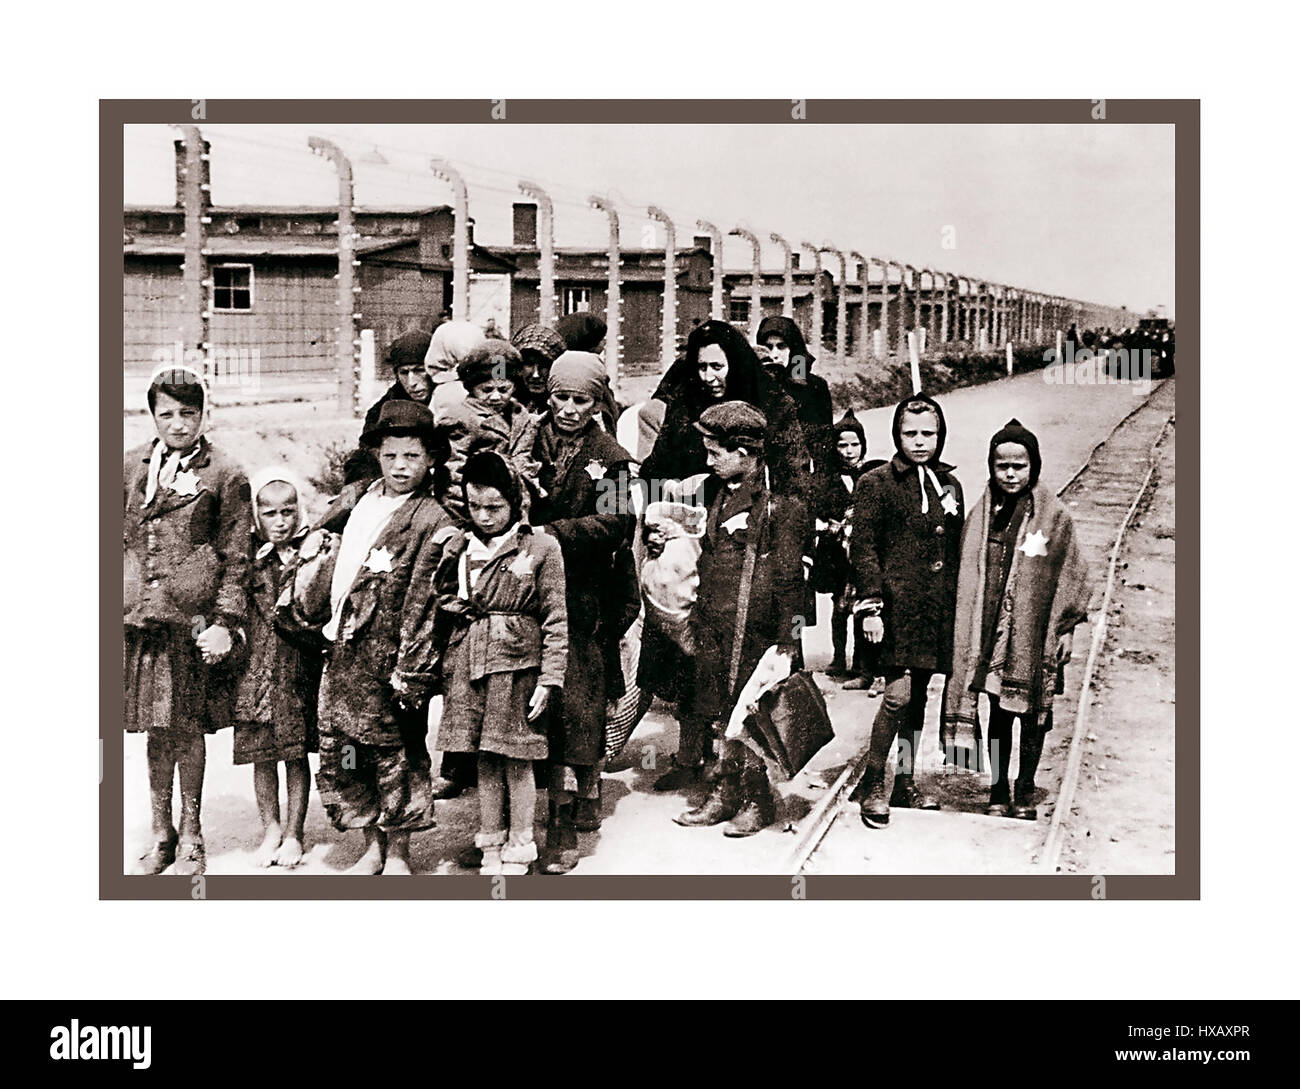 Auschwitz-Birkenau. Jewish children wearing Nazi designated yellow stars arrive in Auschwitz-Birkenau.  A WW2 German Nazi Concentration & Extermination camp. Jewish children made up the largest group of those deported to the camp. They were sent there along with adults, beginning in early 1942, as part of the “final solution of the Jewish question”—the total destruction of the Jewish population of Europe...Auschwitz concentration camp was a network of German Nazi concentration camps and extermination camps built and operated by Third Reich in Polish areas annexed by Nazi Germany during WW2 Stock Photo